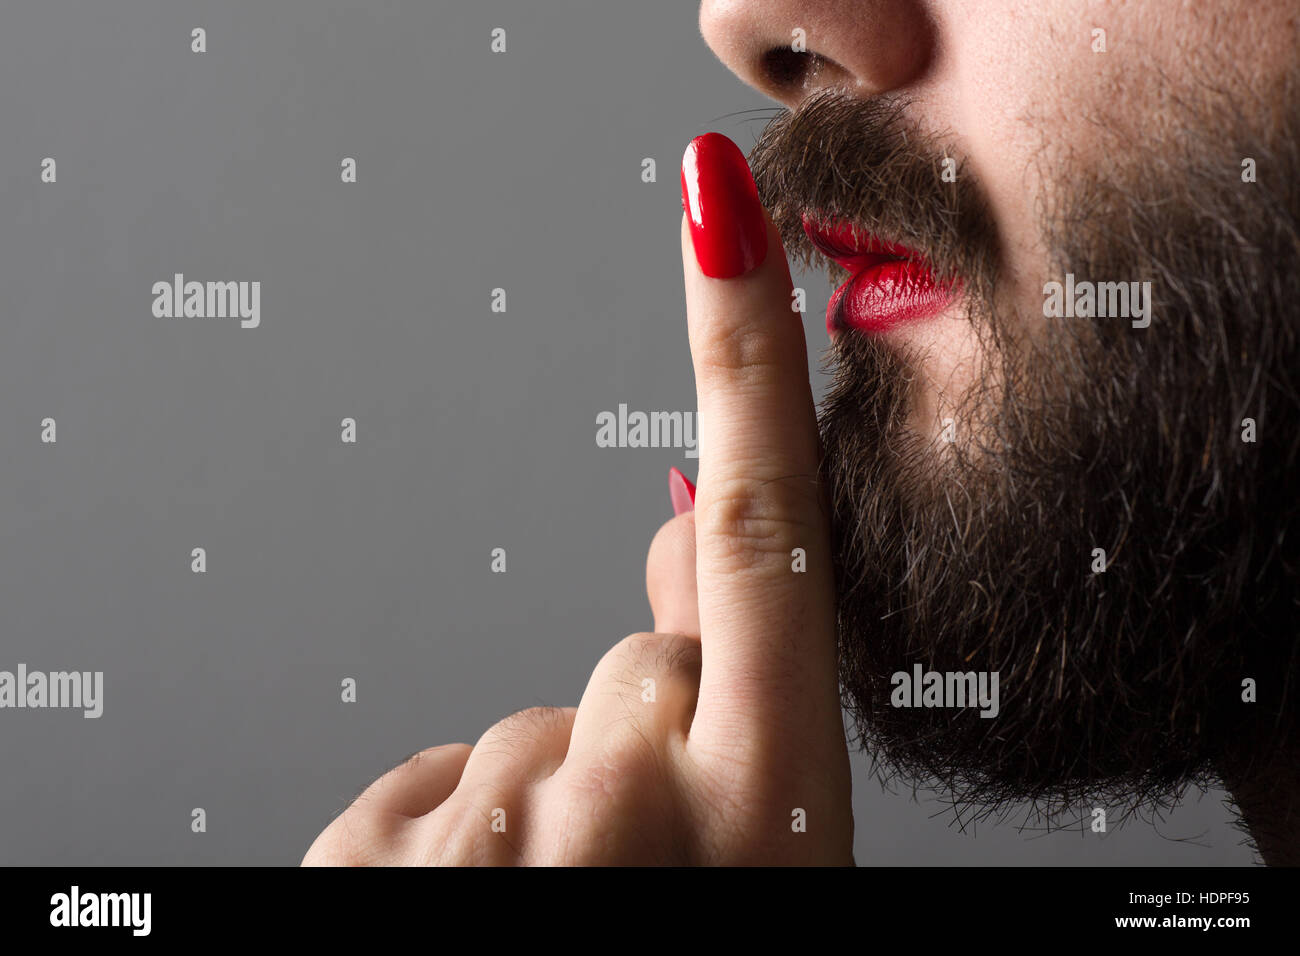 bearded-man-with-red-lipstick-on-his-lips-and-nail-polish-making-silence-HDPF95.jpg